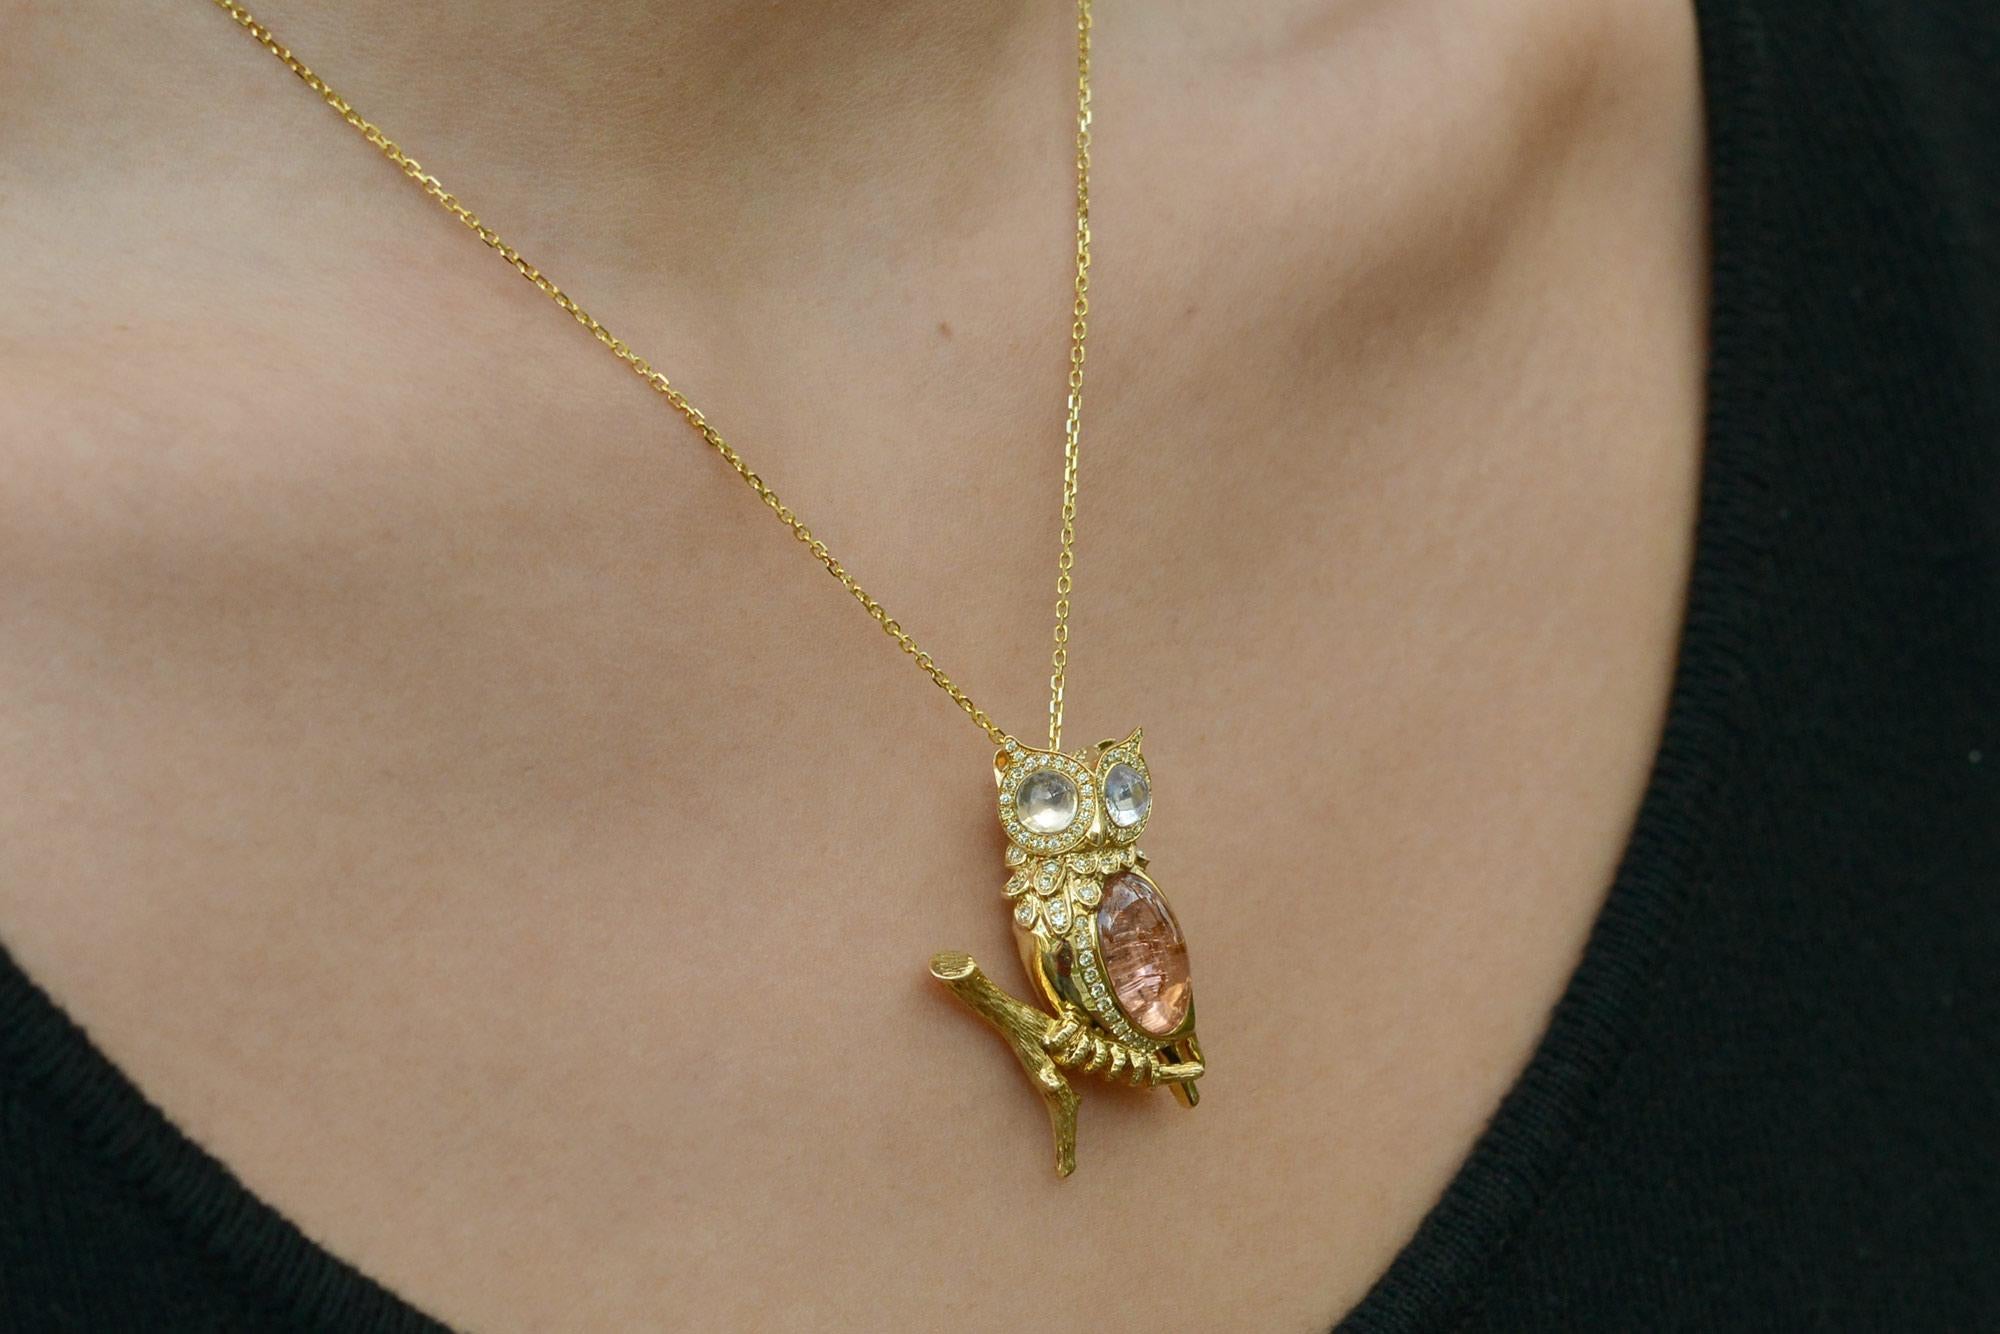 Neoclassical Vintage Tourmaline and Moonstone Owl Necklace